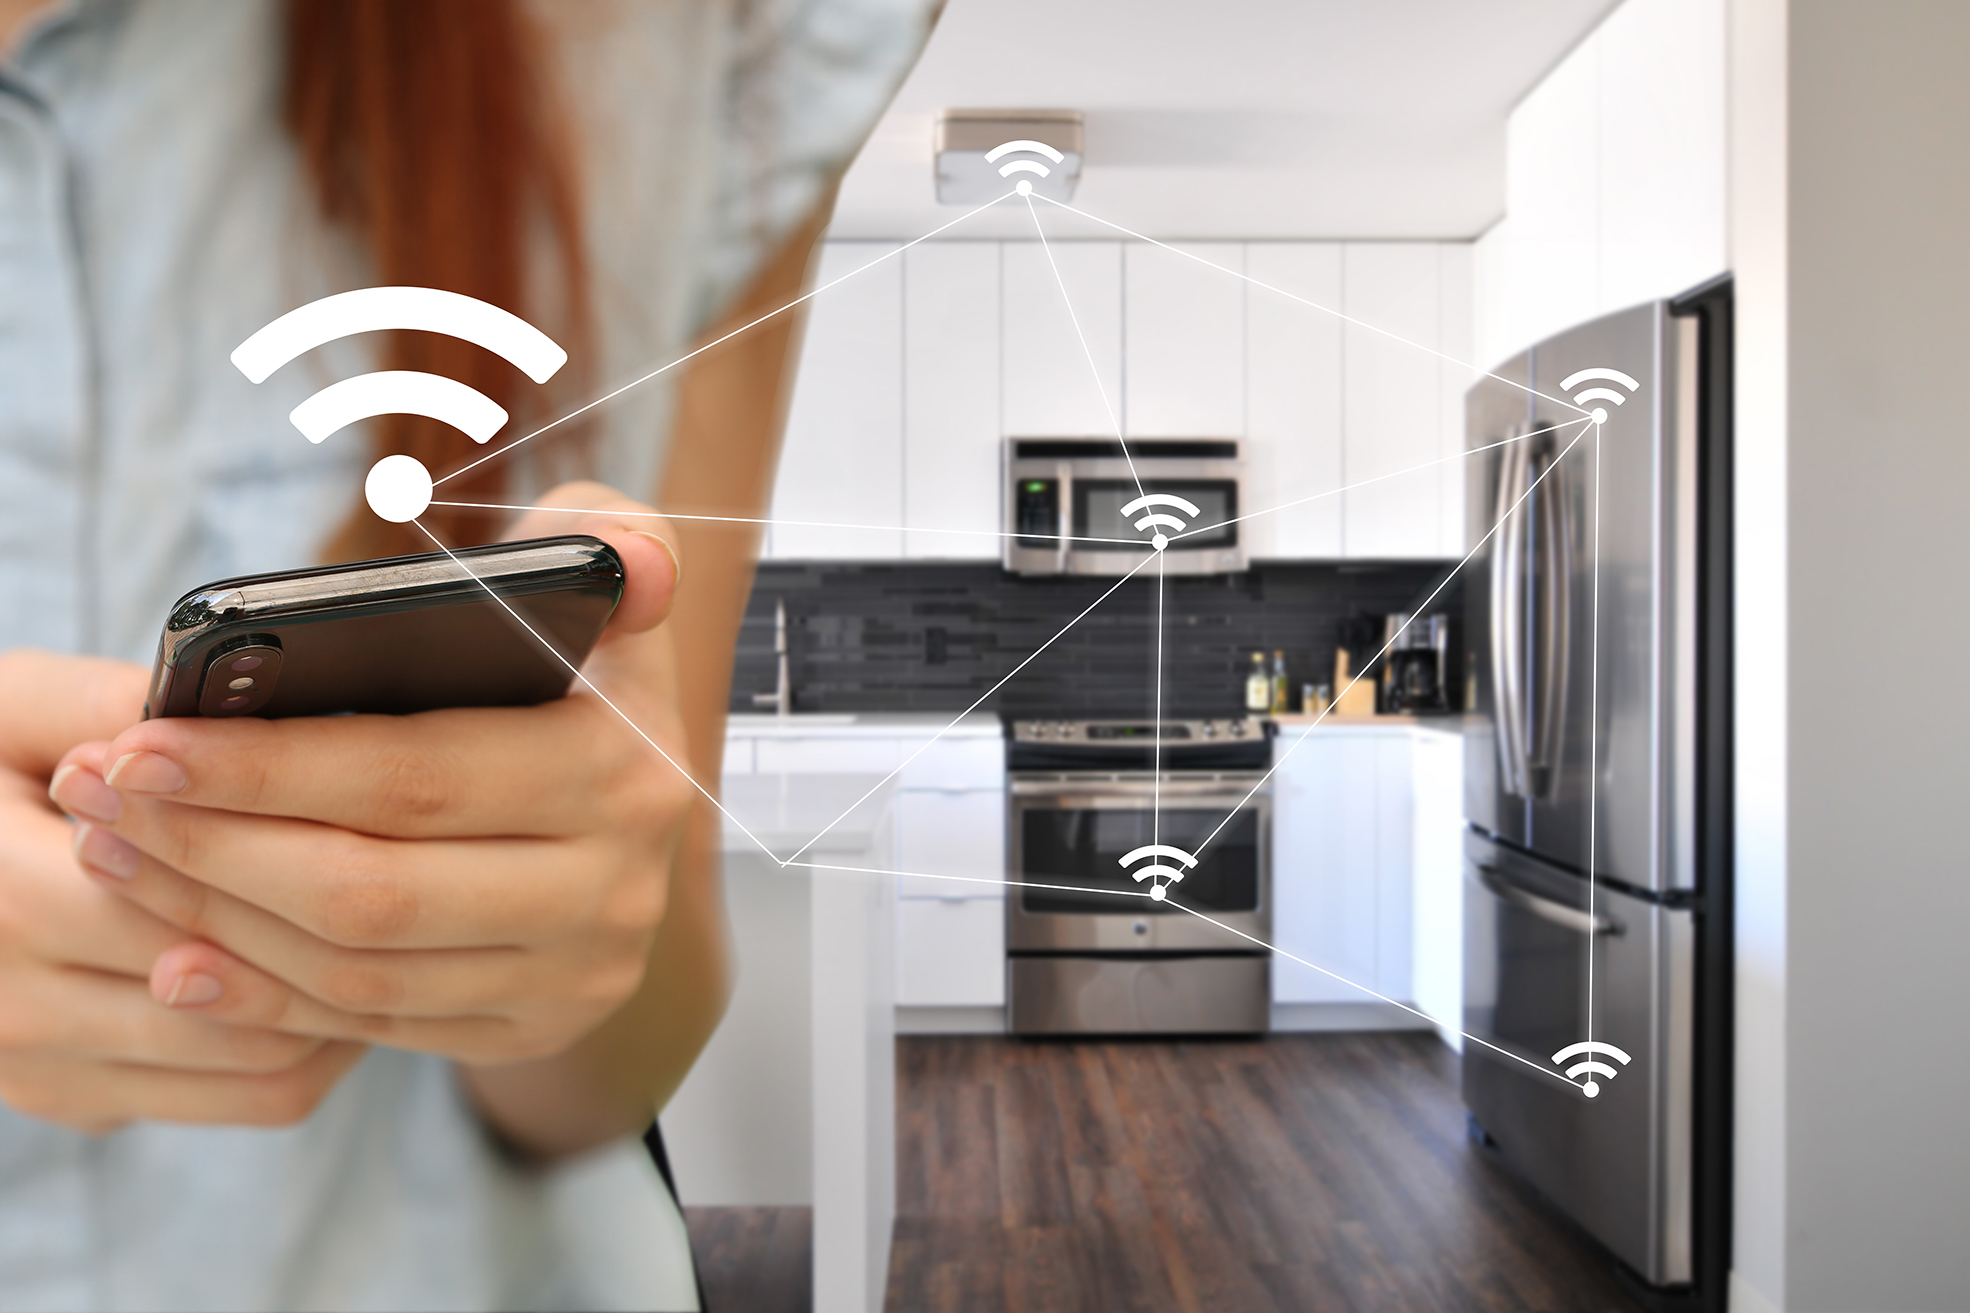 Smart Home Automation: A Luxury or Standard for Rental Properties?